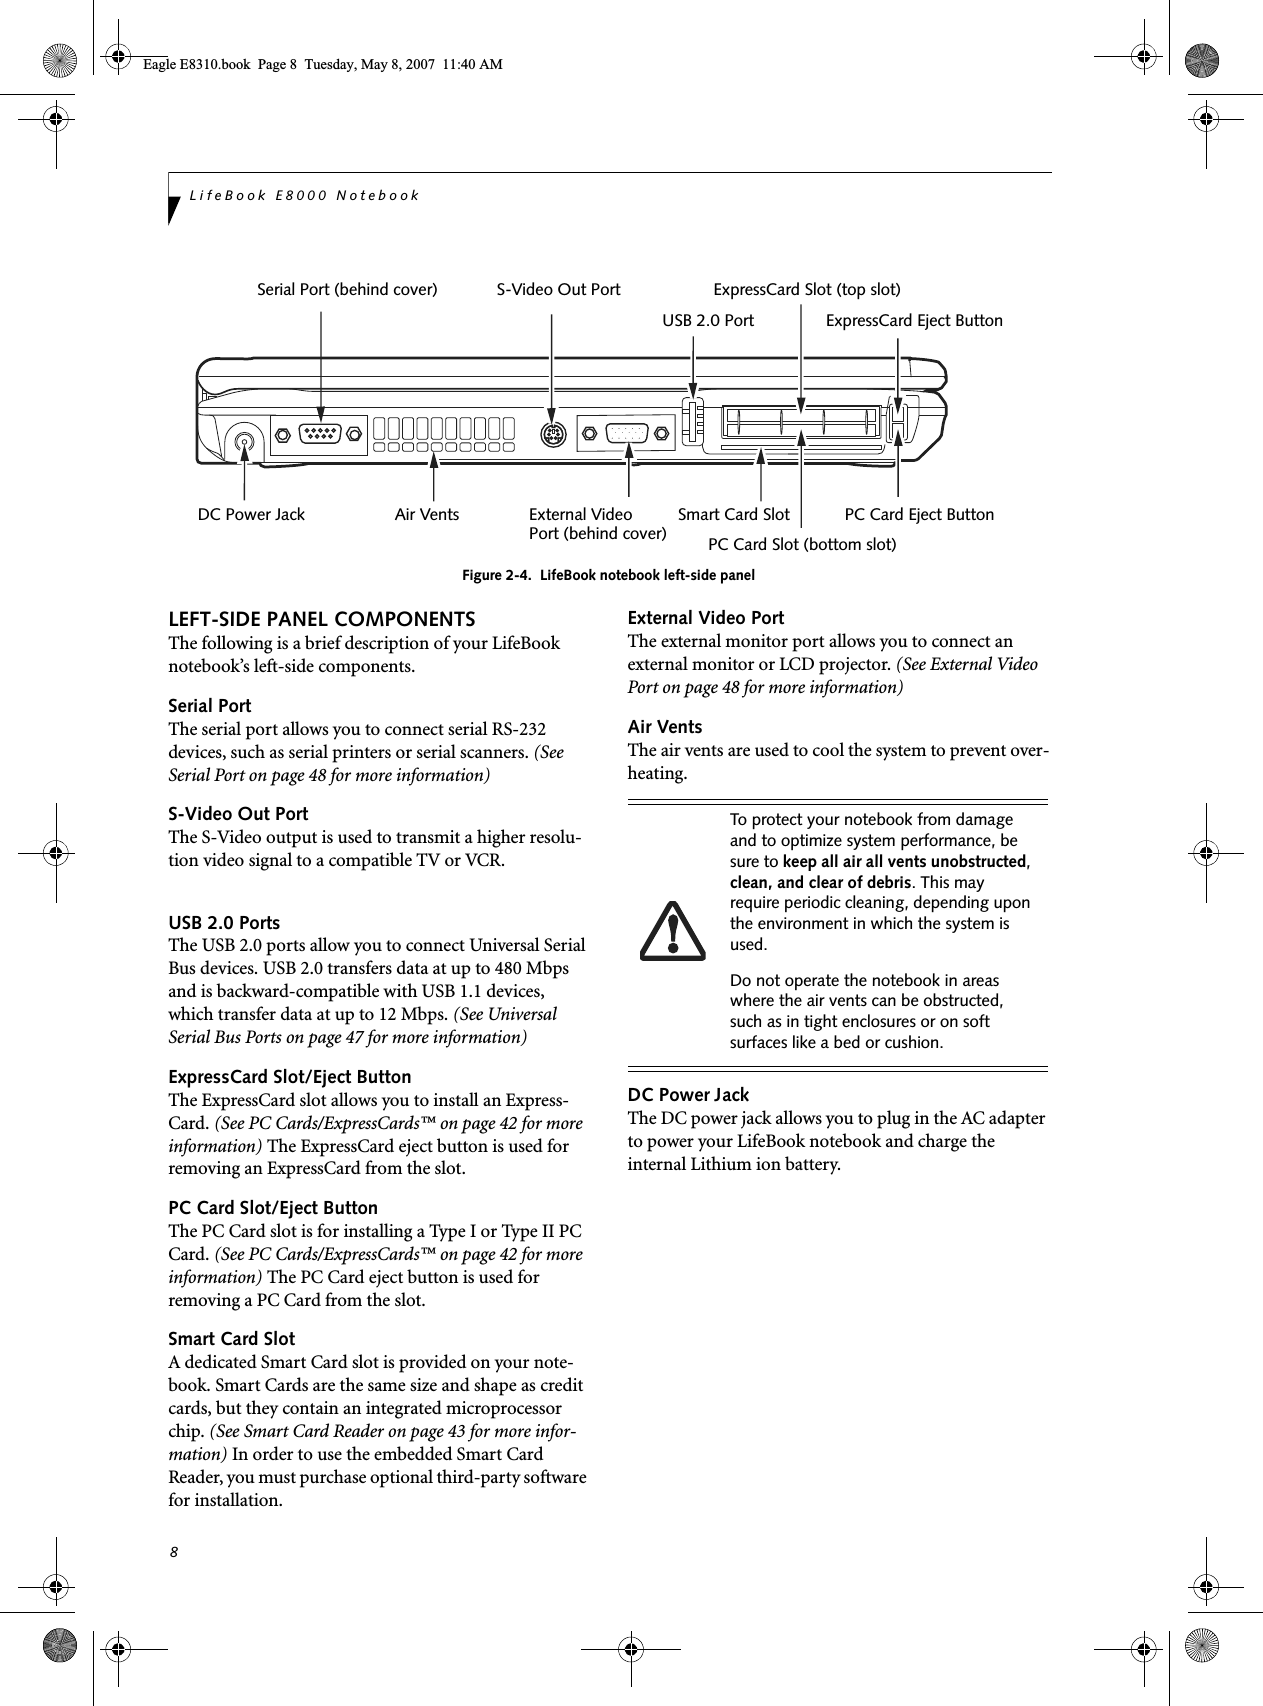 8LifeBook E8000 NotebookFigure 2-4.  LifeBook notebook left-side panelLEFT-SIDE PANEL COMPONENTSThe following is a brief description of your LifeBook notebook’s left-side components. Serial PortThe serial port allows you to connect serial RS-232 devices, such as serial printers or serial scanners. (See Serial Port on page 48 for more information)S-Video Out PortThe S-Video output is used to transmit a higher resolu-tion video signal to a compatible TV or VCR.USB 2.0 PortsThe USB 2.0 ports allow you to connect Universal Serial Bus devices. USB 2.0 transfers data at up to 480 Mbps and is backward-compatible with USB 1.1 devices, which transfer data at up to 12 Mbps. (See Universal Serial Bus Ports on page 47 for more information)ExpressCard Slot/Eject ButtonThe ExpressCard slot allows you to install an Express-Card. (See PC Cards/ExpressCards™ on page 42 for more information) The ExpressCard eject button is used for removing an ExpressCard from the slot.PC Card Slot/Eject ButtonThe PC Card slot is for installing a Type I or Type II PC Card. (See PC Cards/ExpressCards™ on page 42 for more information) The PC Card eject button is used for removing a PC Card from the slot.Smart Card SlotA dedicated Smart Card slot is provided on your note-book. Smart Cards are the same size and shape as credit cards, but they contain an integrated microprocessor chip. (See Smart Card Reader on page 43 for more infor-mation) In order to use the embedded Smart Card Reader, you must purchase optional third-party software for installation.External Video PortThe external monitor port allows you to connect an external monitor or LCD projector. (See External Video Port on page 48 for more information)Air VentsThe air vents are used to cool the system to prevent over-heating. DC Power JackThe DC power jack allows you to plug in the AC adapter to power your LifeBook notebook and charge the internal Lithium ion battery.Serial Port (behind cover) S-Video Out PortUSB 2.0 PortExpressCard Slot (top slot)ExpressCard Eject ButtonDC Power Jack Air Vents External VideoPort (behind cover)Smart Card SlotPC Card Slot (bottom slot)PC Card Eject ButtonTo protect your notebook from damage and to optimize system performance, be sure to keep all air all vents unobstructed, clean, and clear of debris. This may require periodic cleaning, depending upon the environment in which the system is used. Do not operate the notebook in areas where the air vents can be obstructed, such as in tight enclosures or on soft surfaces like a bed or cushion.Eagle E8310.book  Page 8  Tuesday, May 8, 2007  11:40 AM